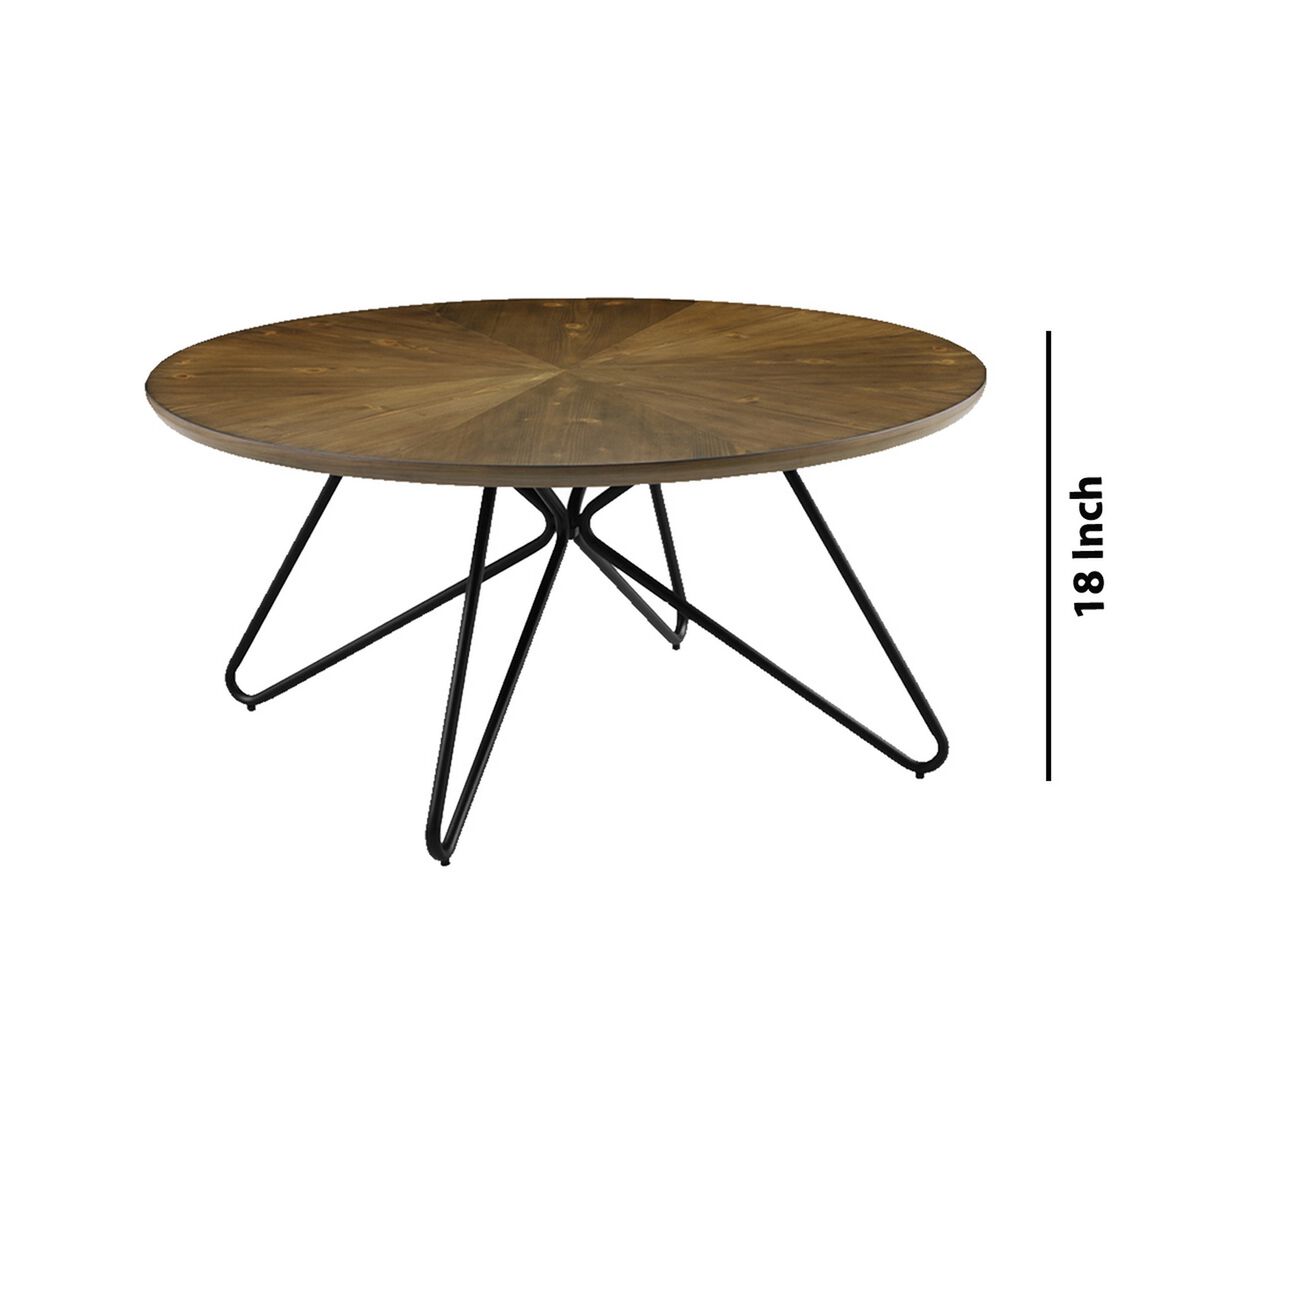 Dual Tone Round Wooden Coffee Table with Metal Hairpin Legs,Brown and Black